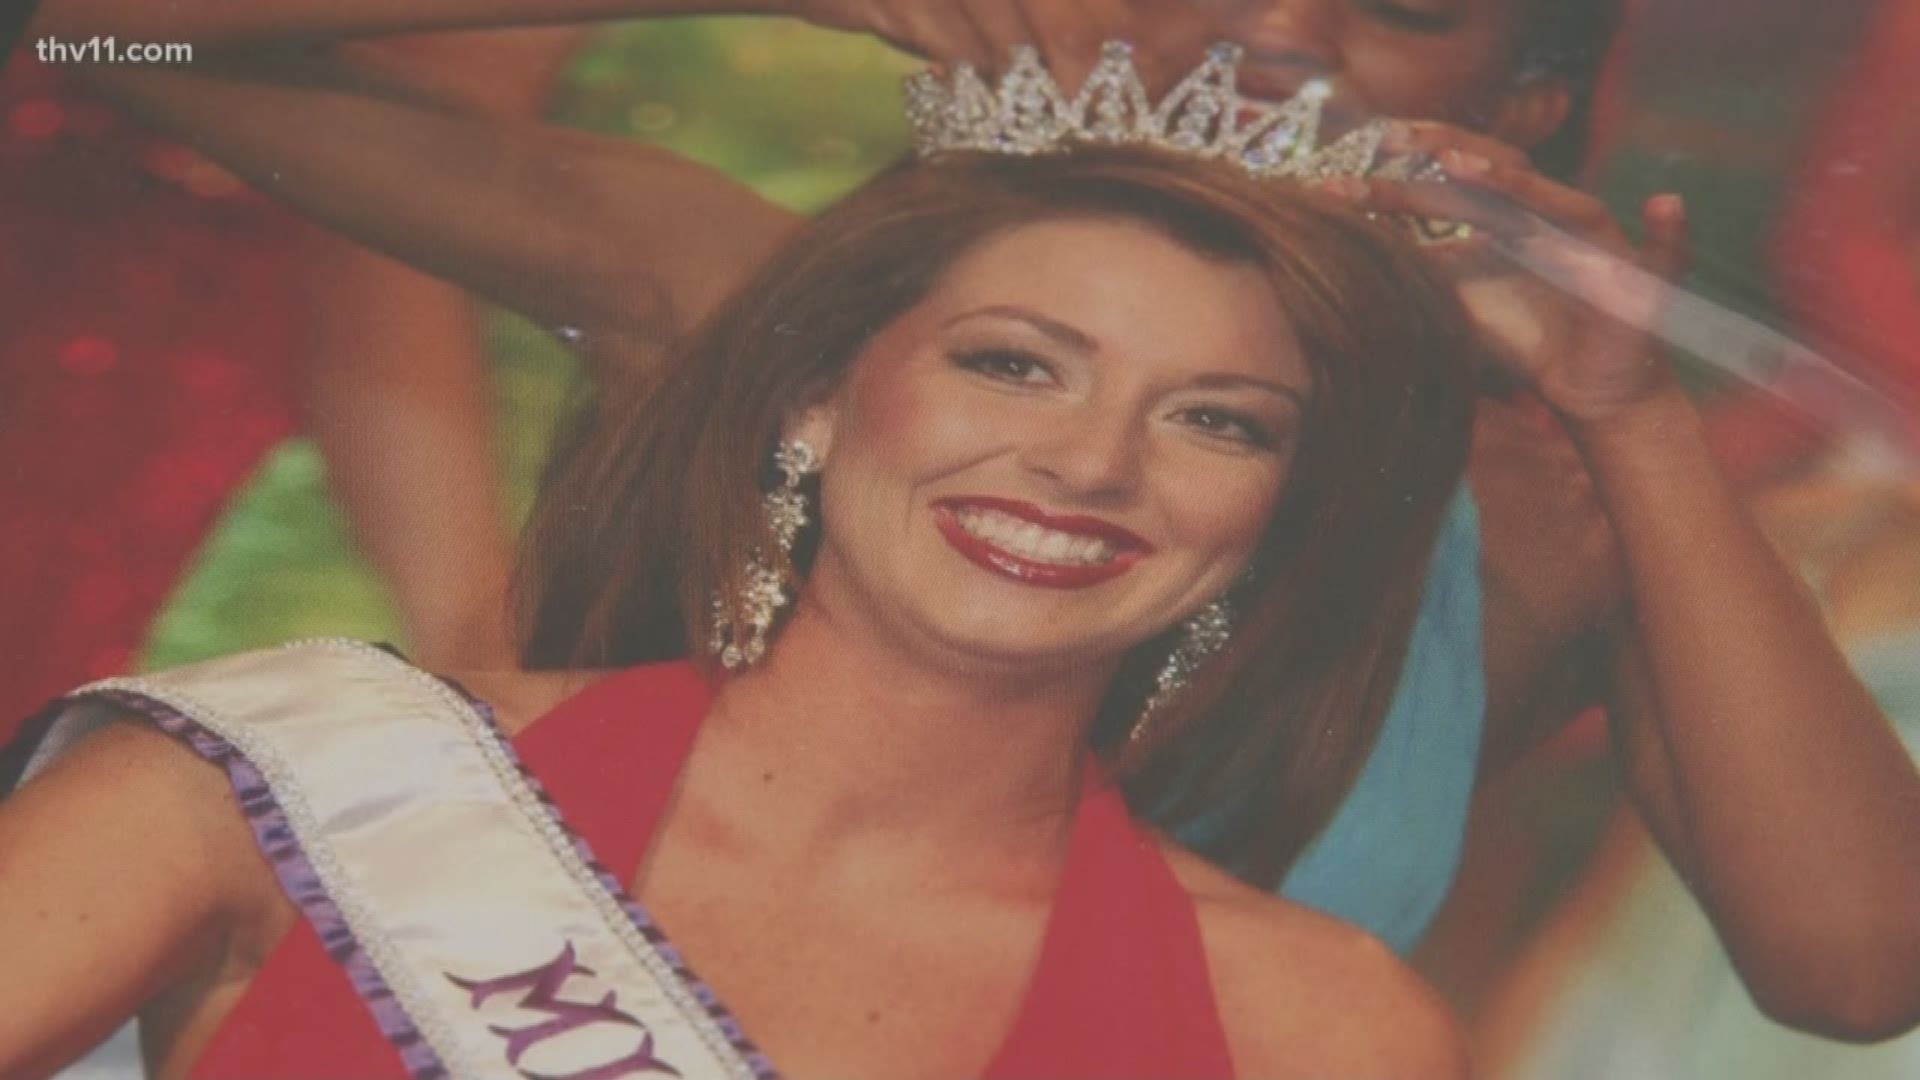 Miss America eliminates swimsuit competition